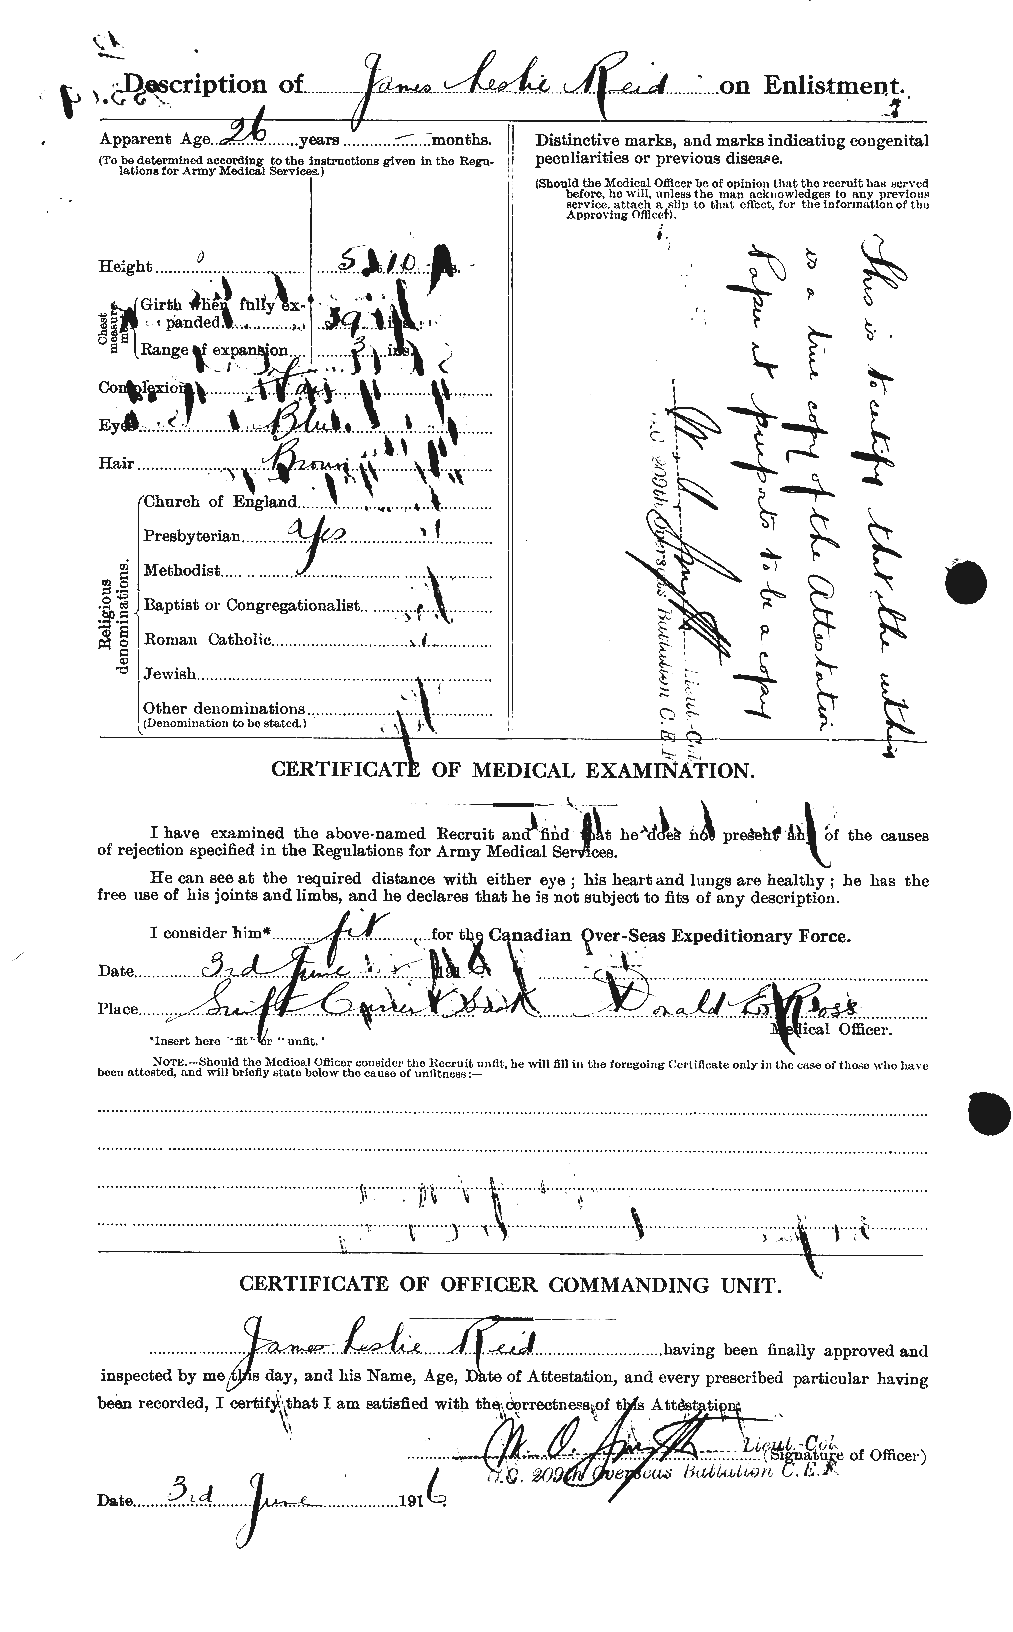 Personnel Records of the First World War - CEF 598723b